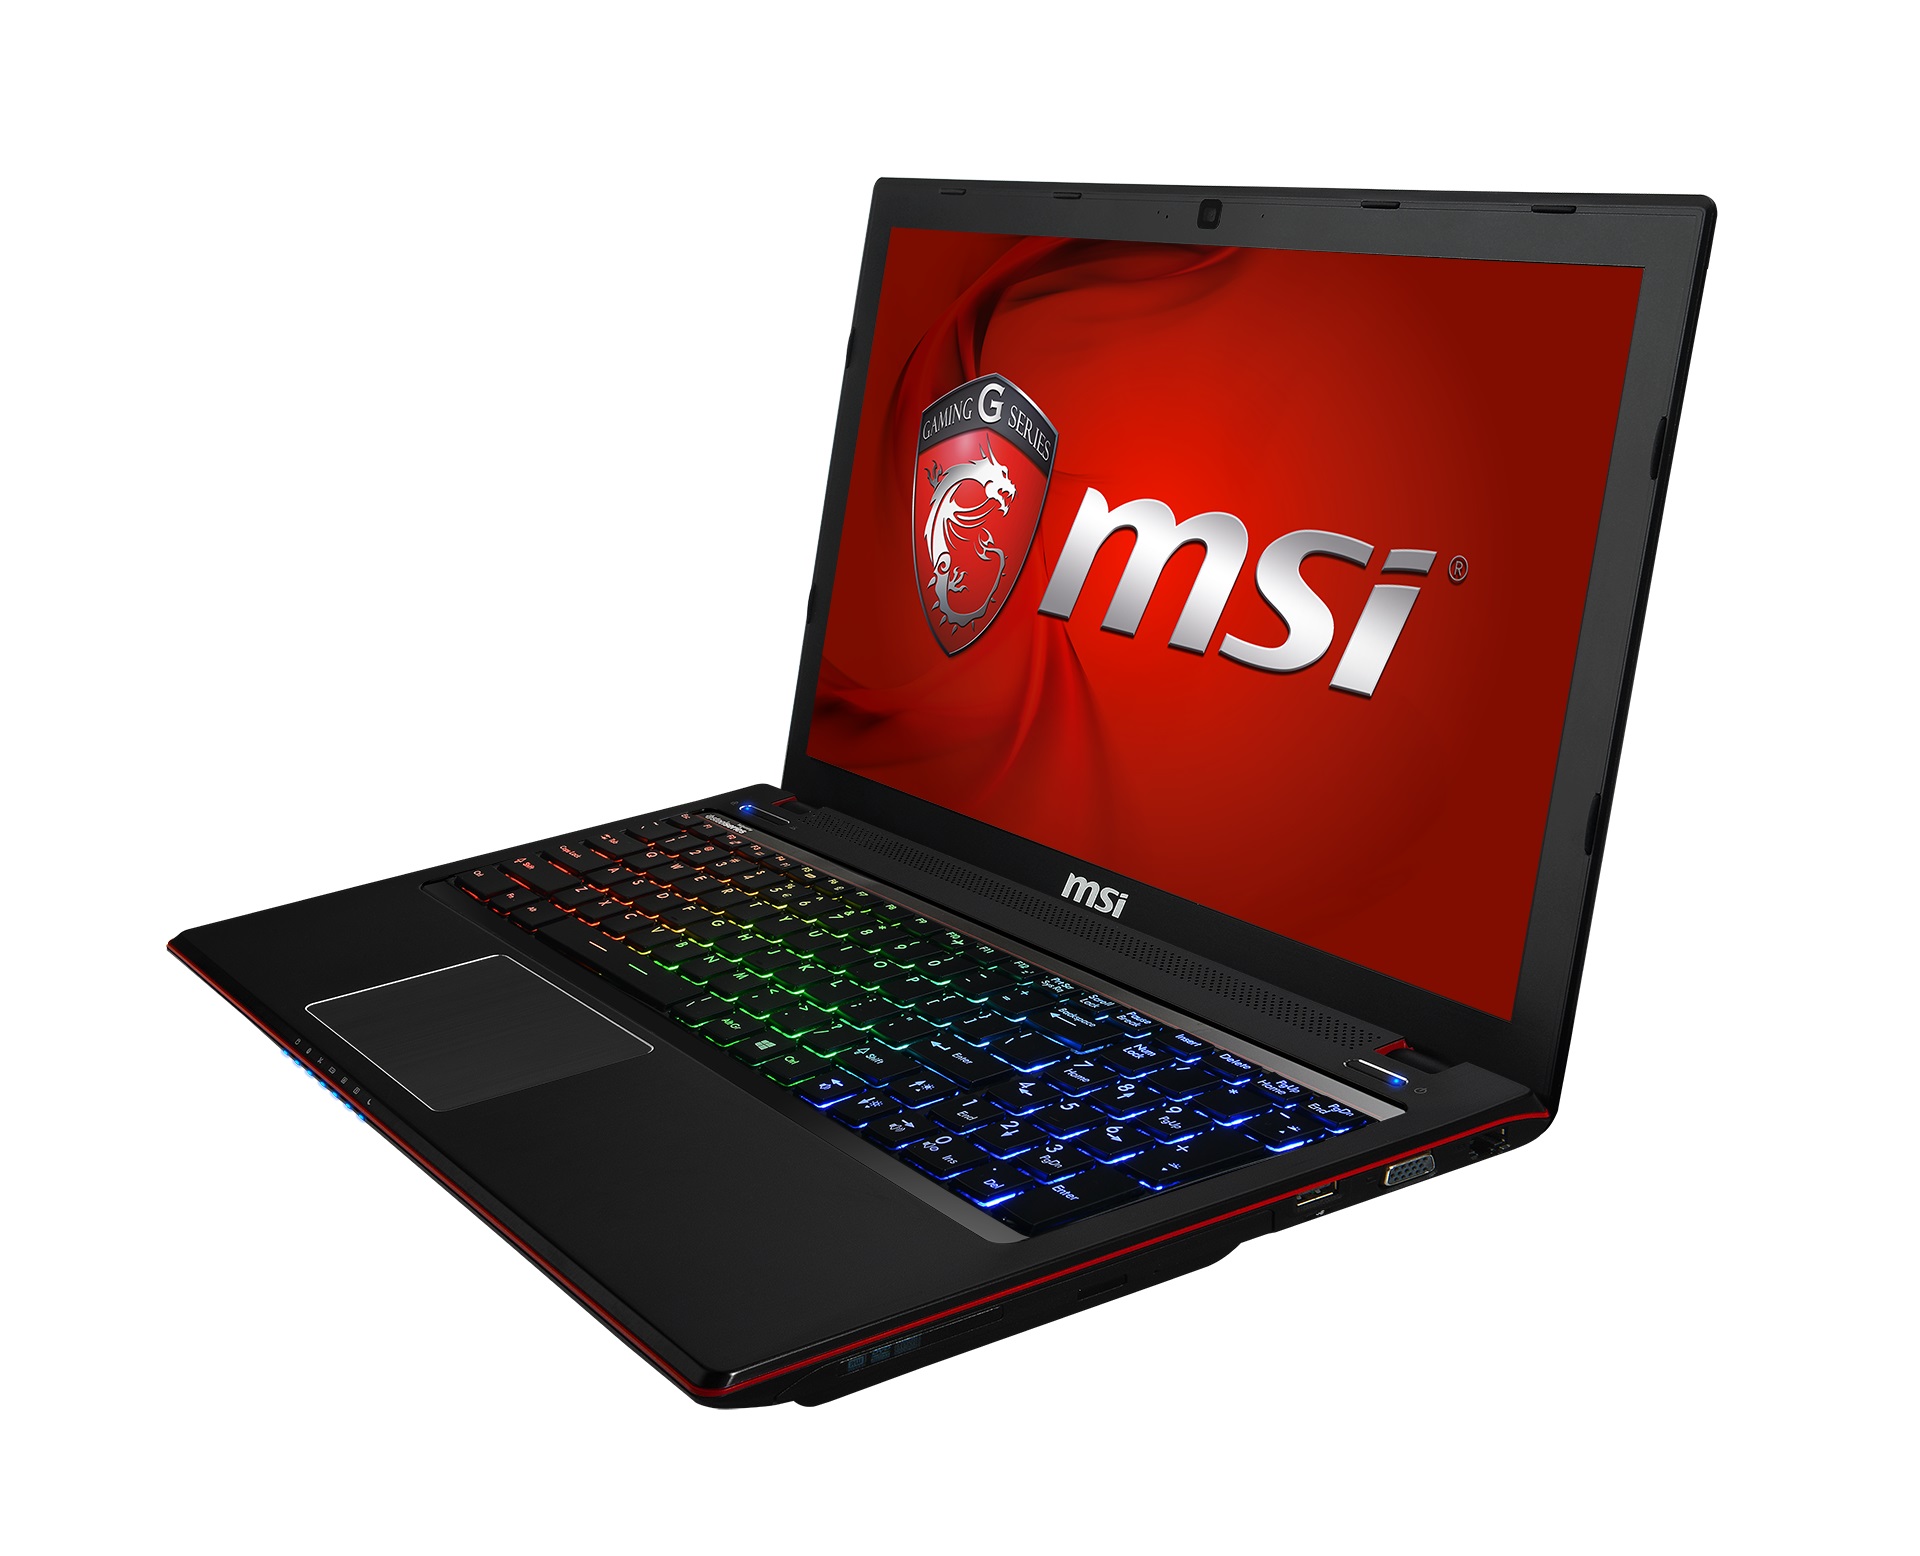 Msi Arms Laptops And Aios With Nvidia Geforce Gtx 960m Graphics Legit Reviews